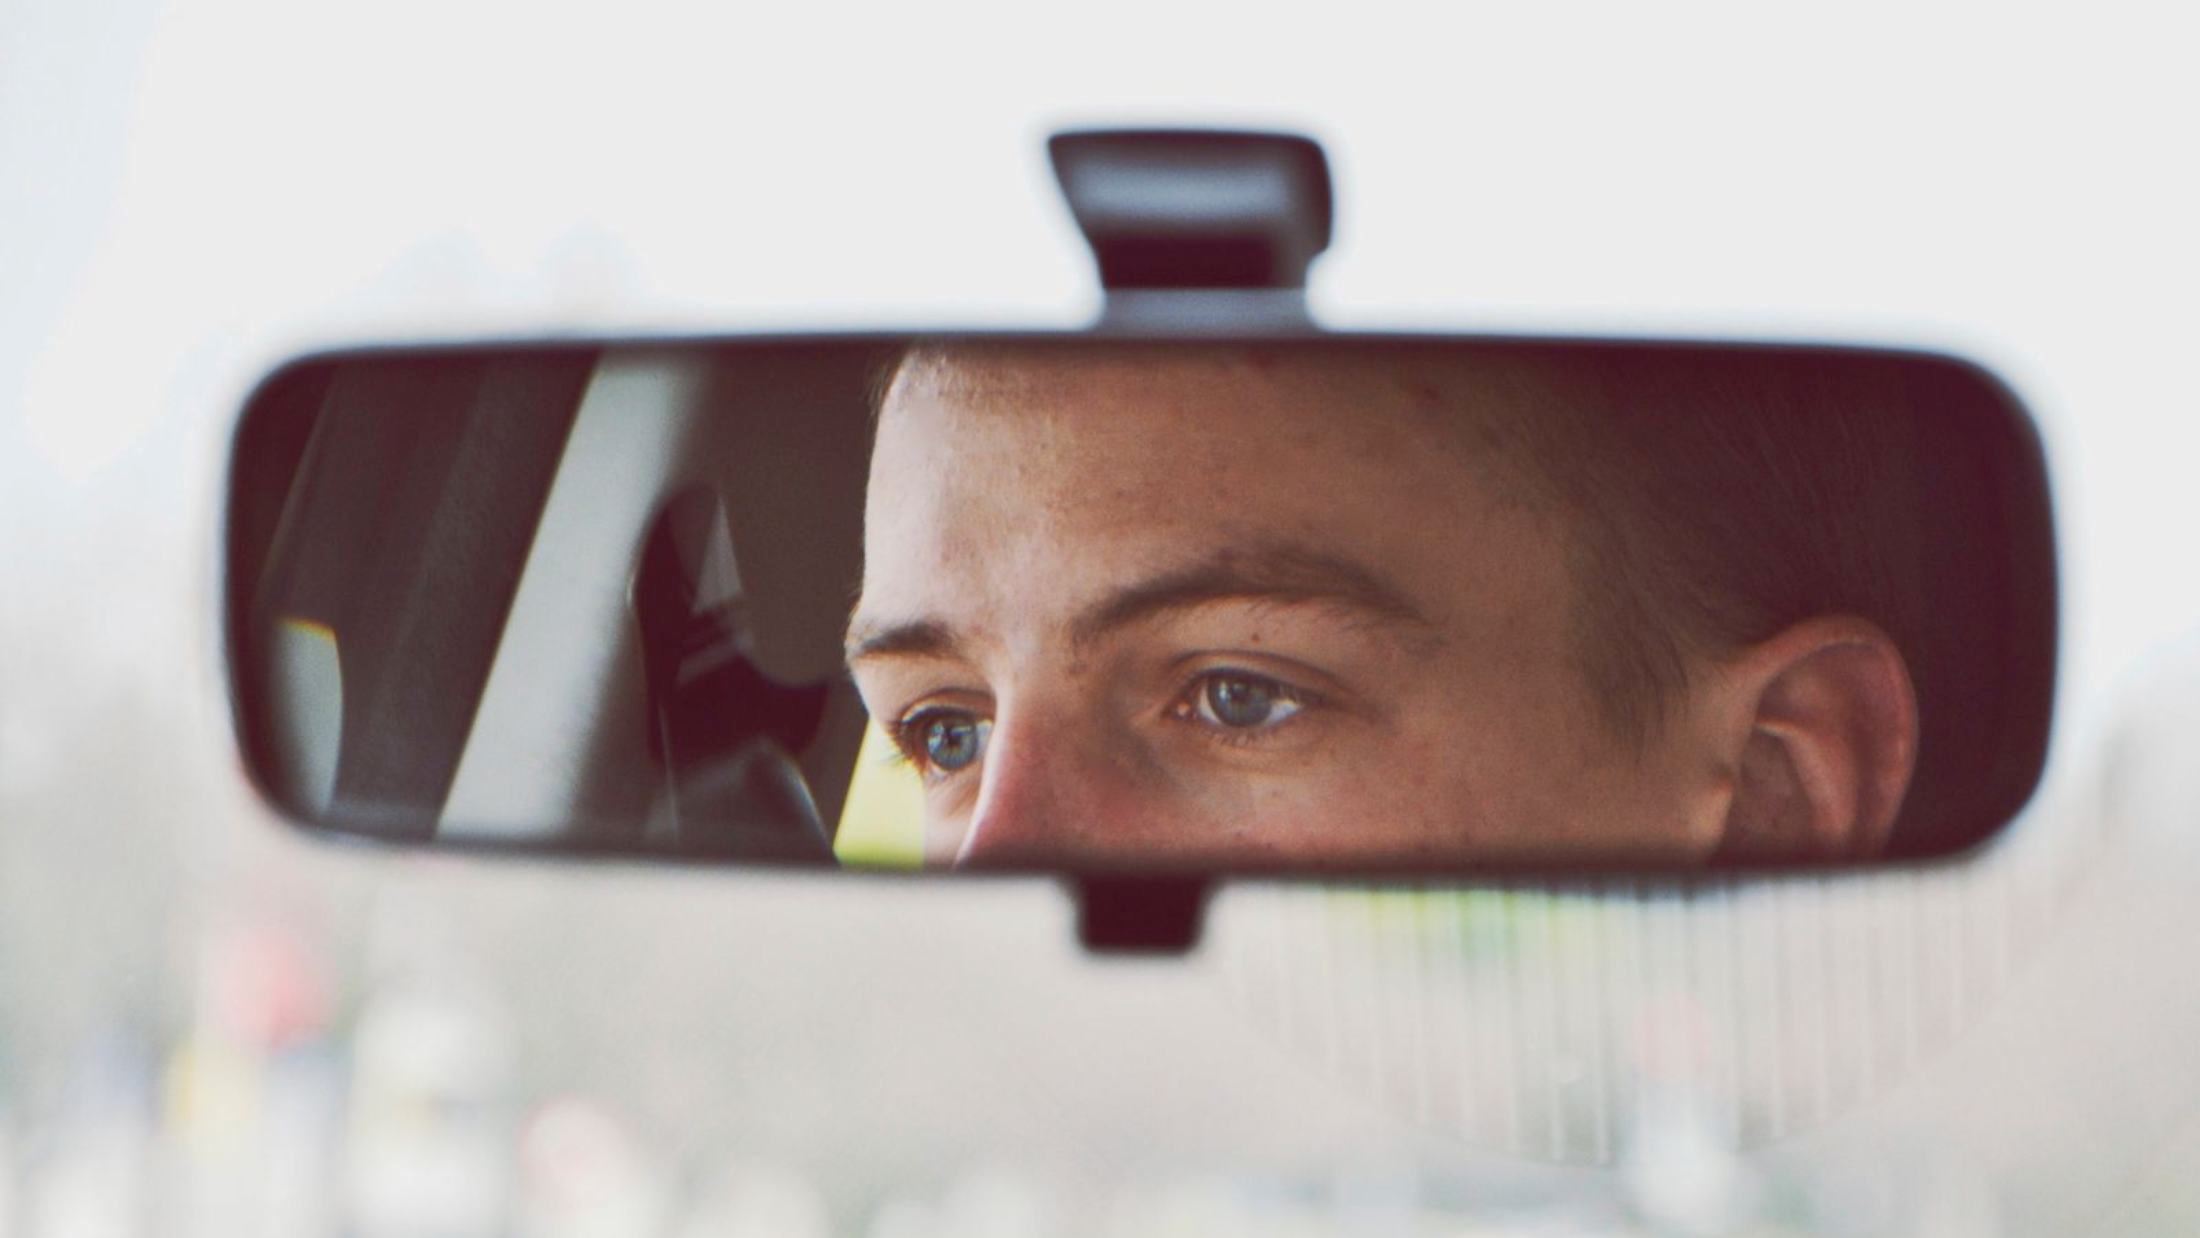 Reflection of man in car rear-view mirror